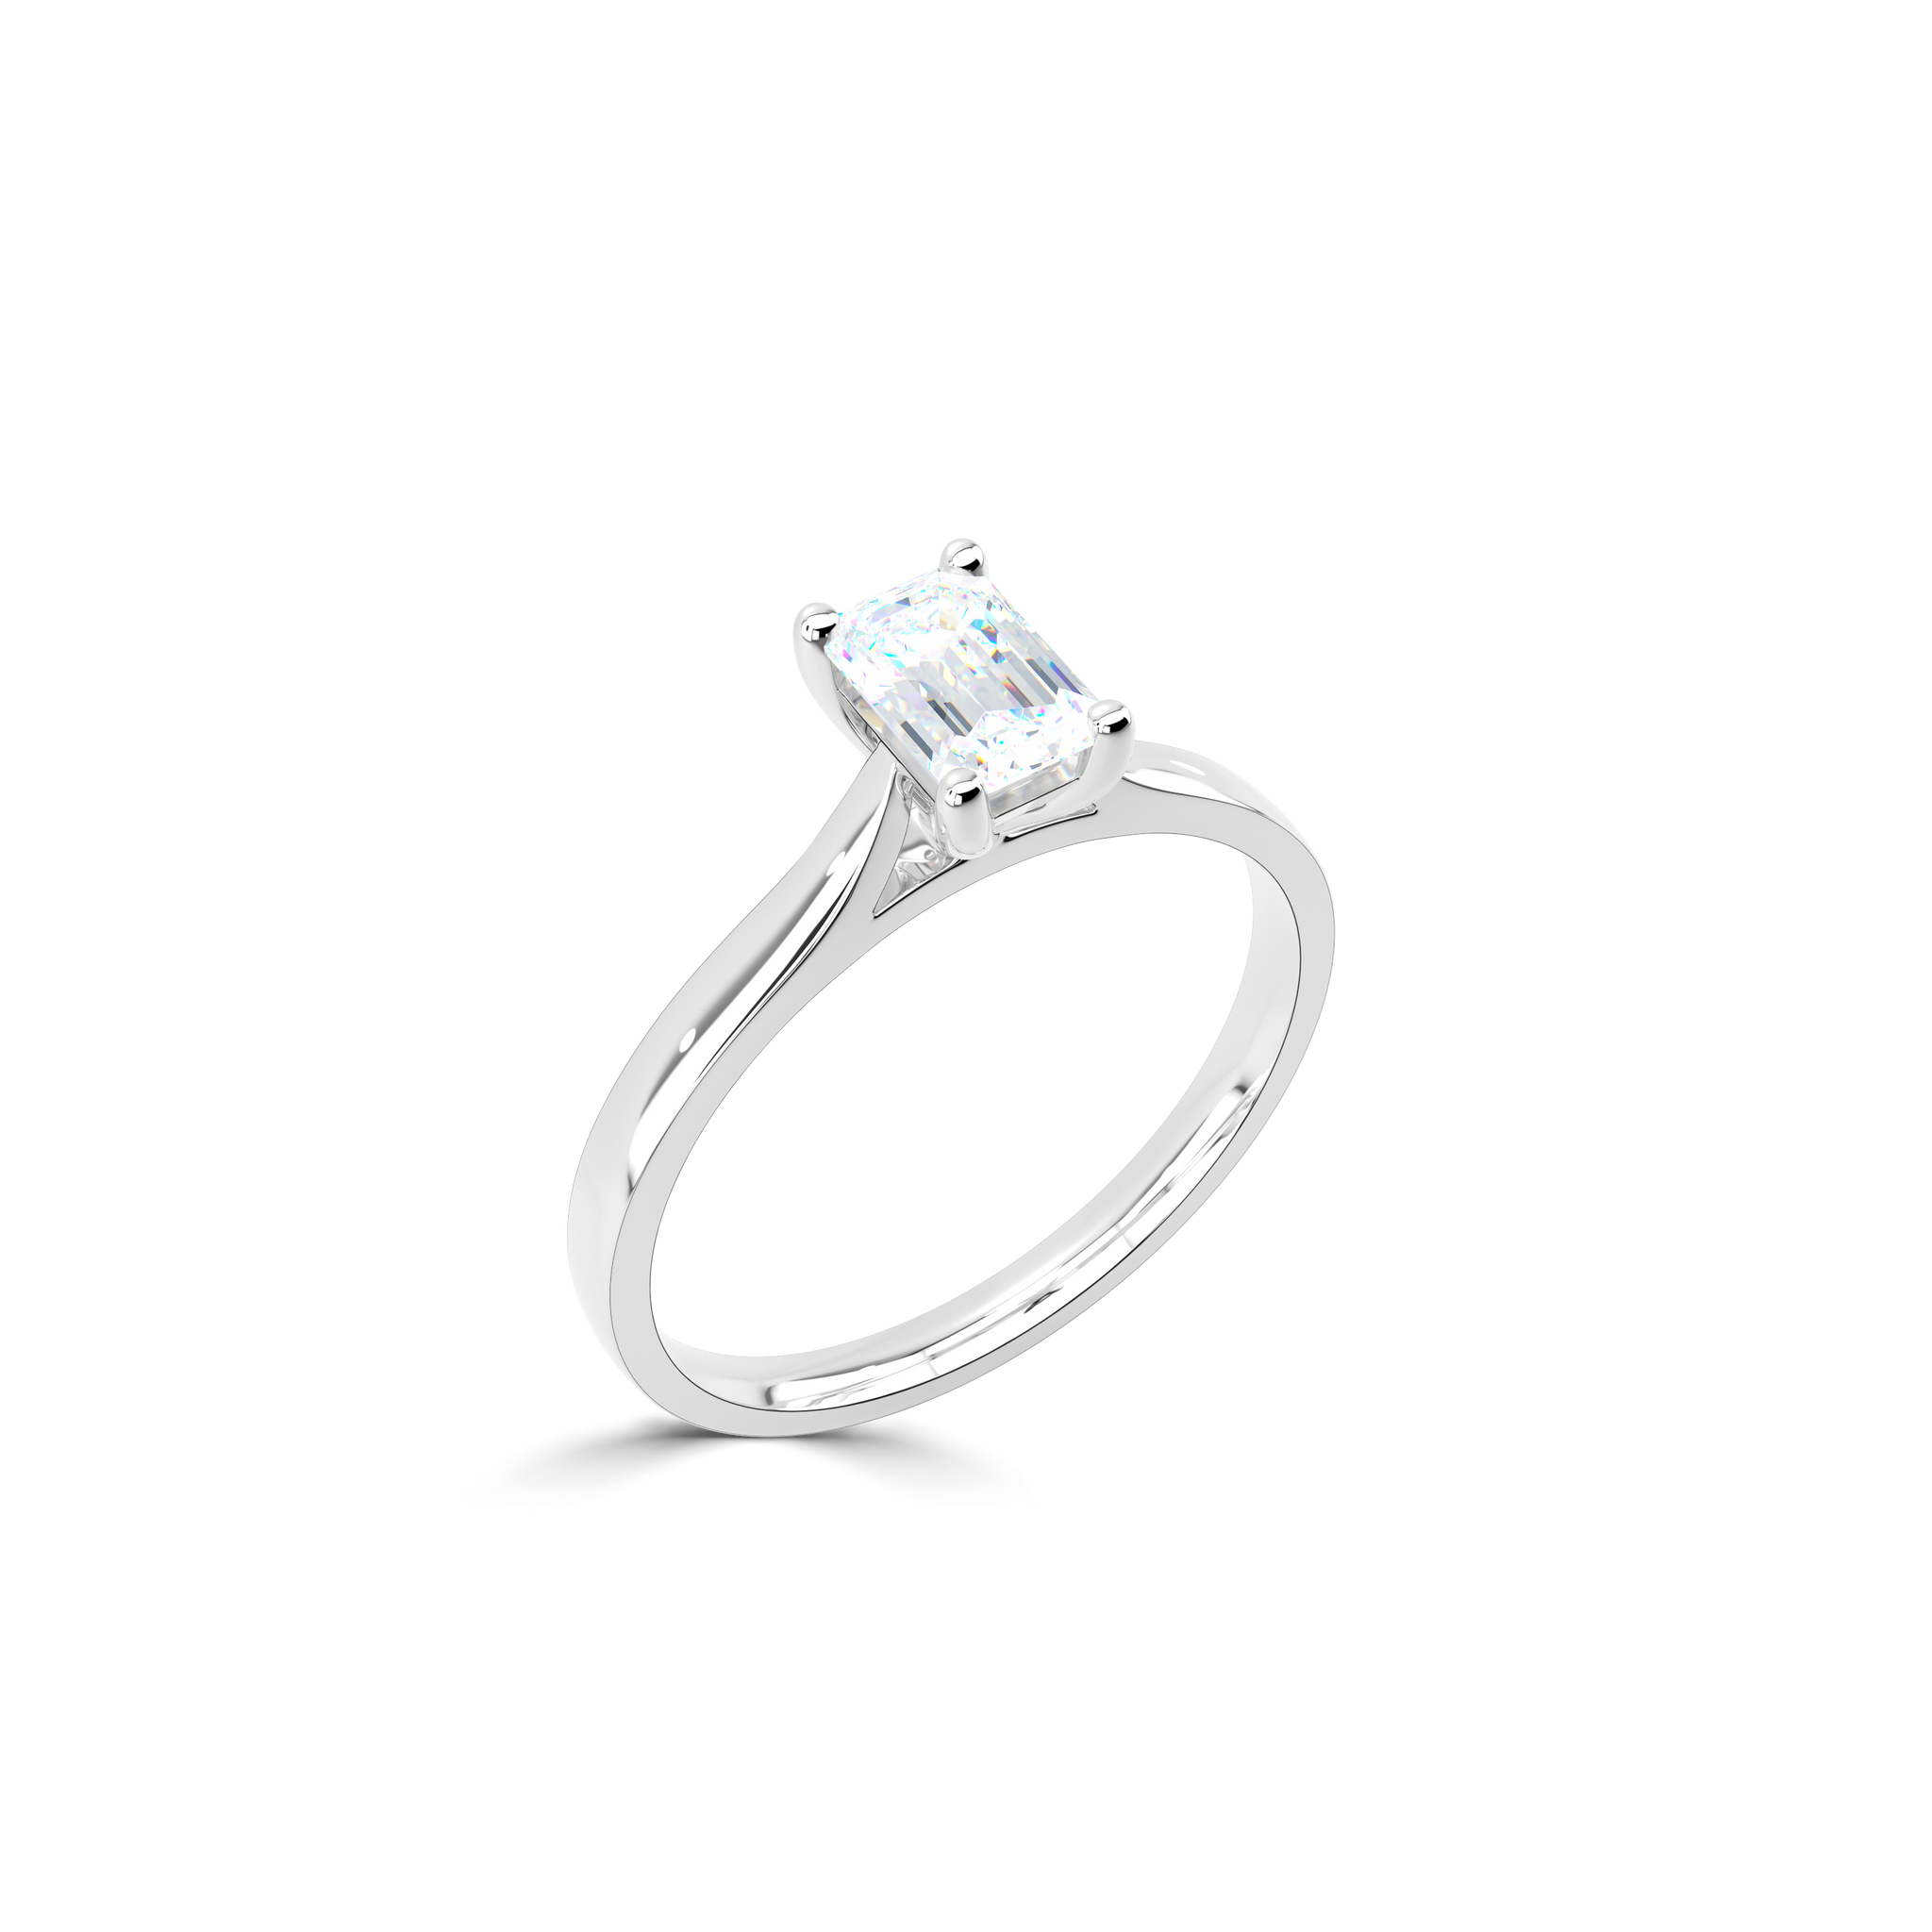 Ophelia *Select an Emerald Cut Diamond 0.40ct or above